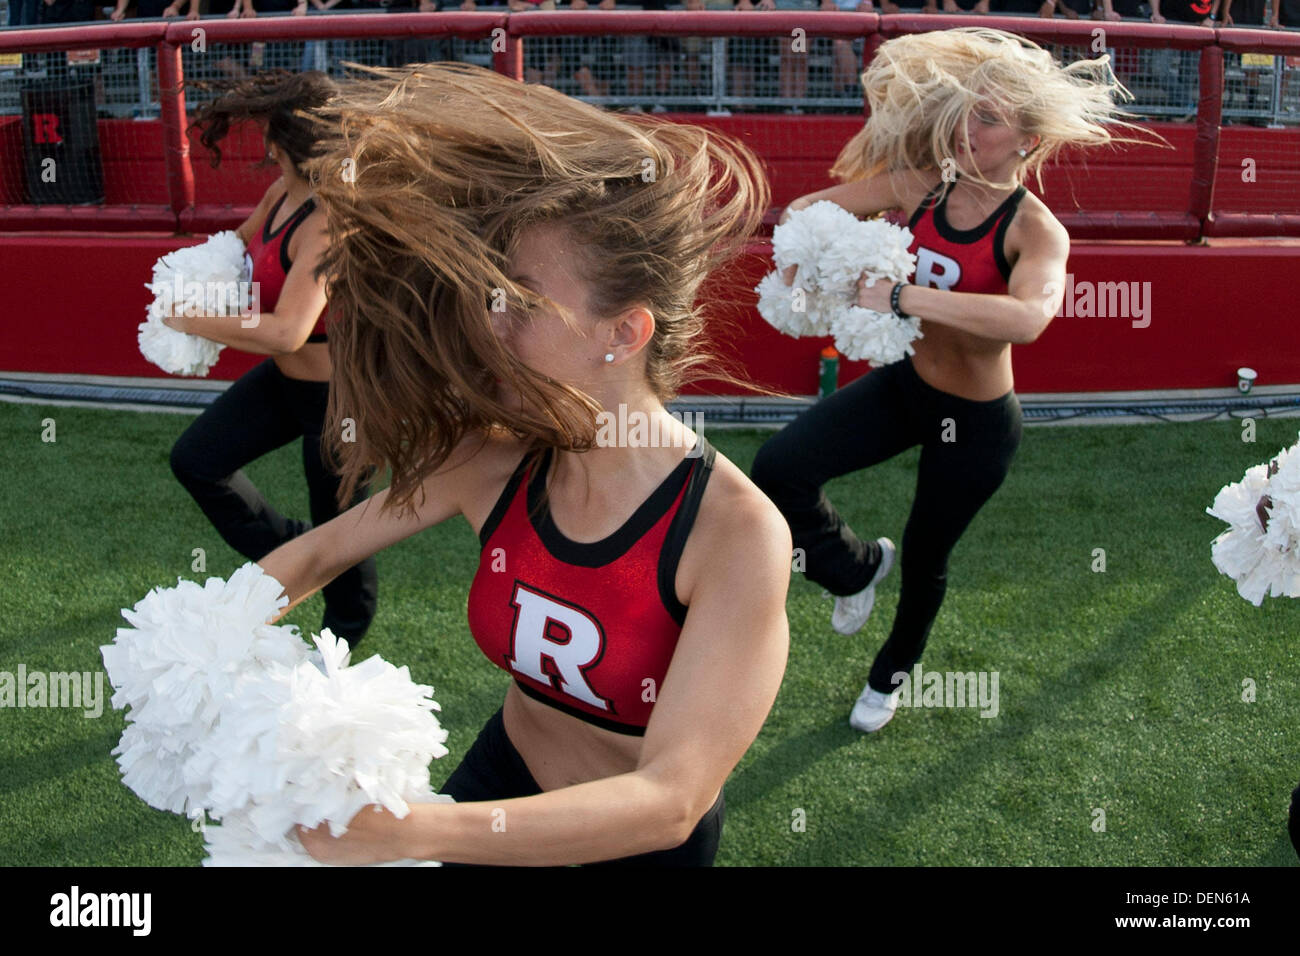 Piscataway, New Jersey, USA. 21st Sep, 2013. September 21, 2013: A Rutgers Scarlet Knights cheerleader has her hair whip around her face during the game between Arkansas Razorbacks and Rutgers Scarlet Knights at Highpoint Solutions Stadium in Piscataway, NJ. Rutgers Scarlet Knights defeated The Arkansas Razorbacks 28-24. Credit:  csm/Alamy Live News Stock Photo